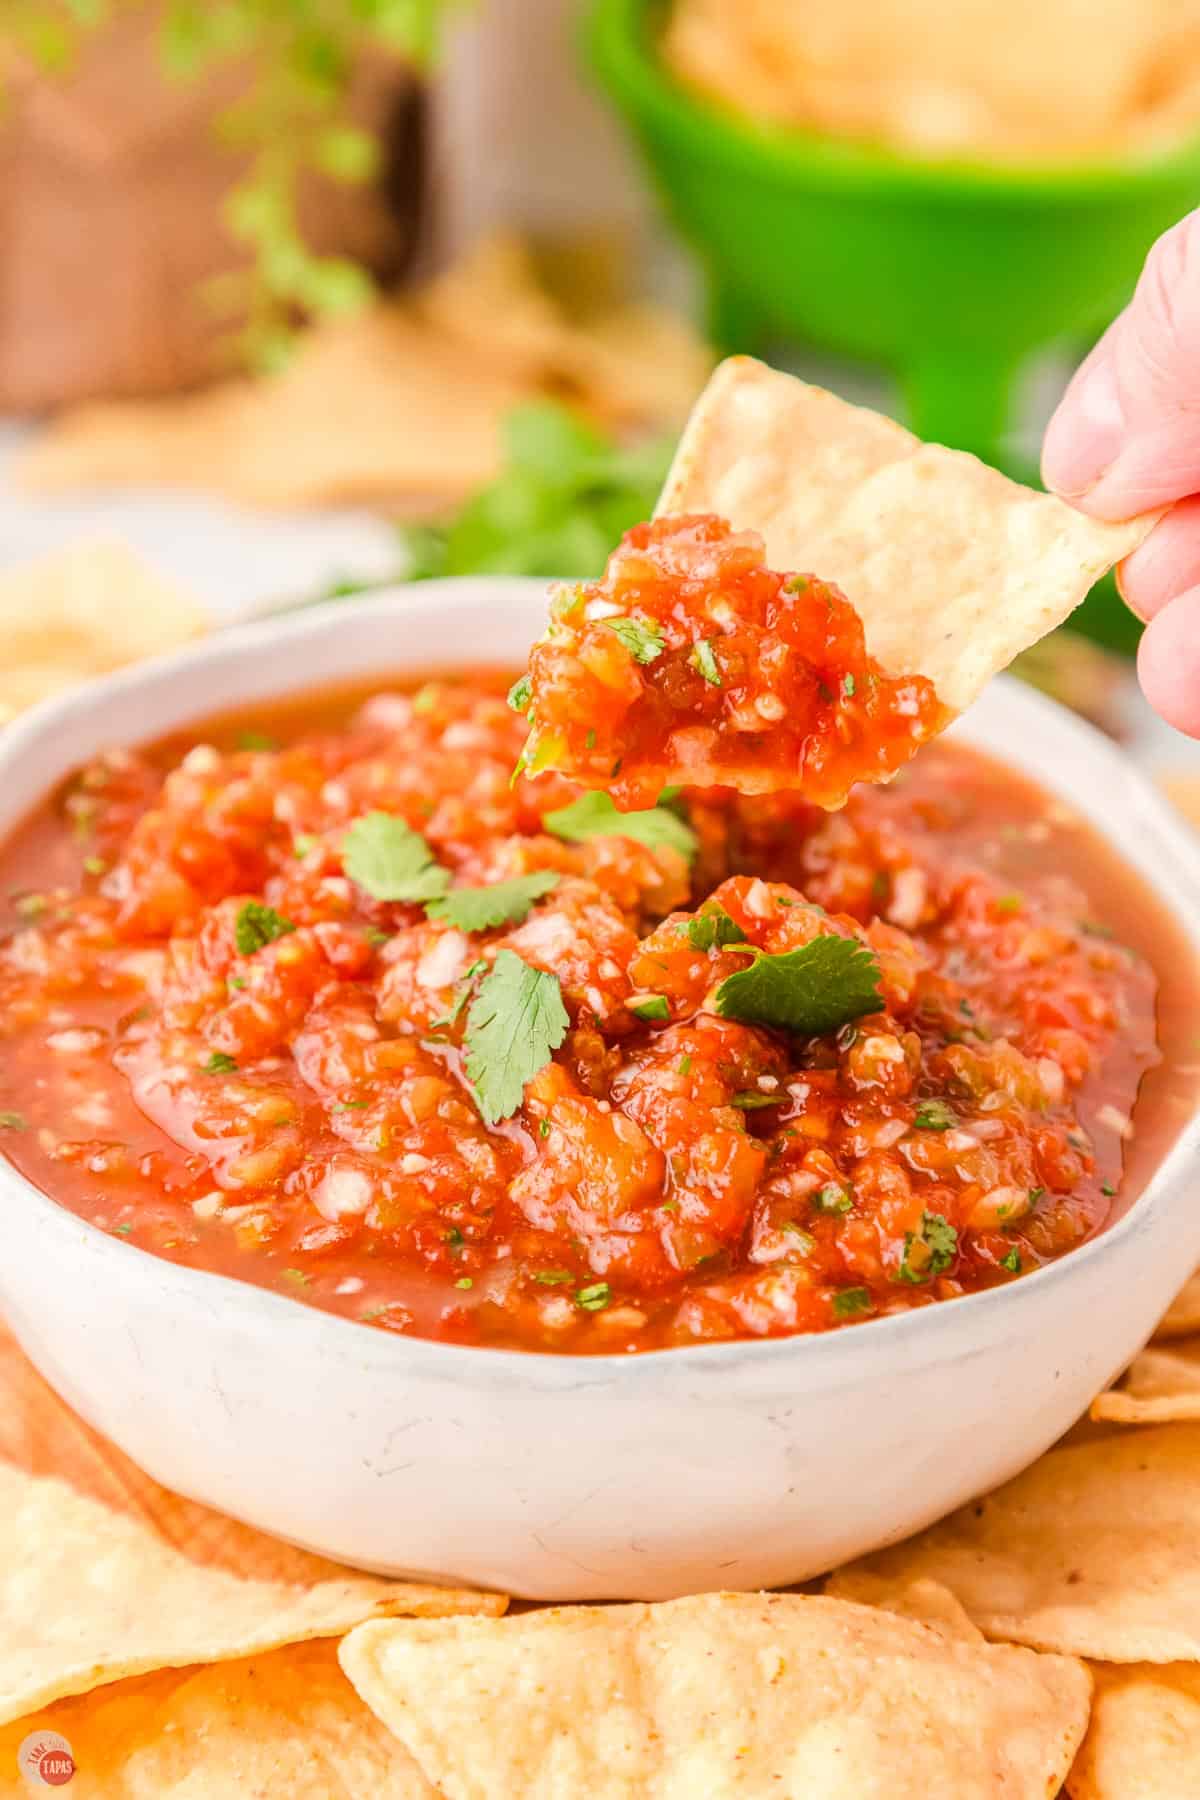 hand scooping out homemade salsa from a white bowl